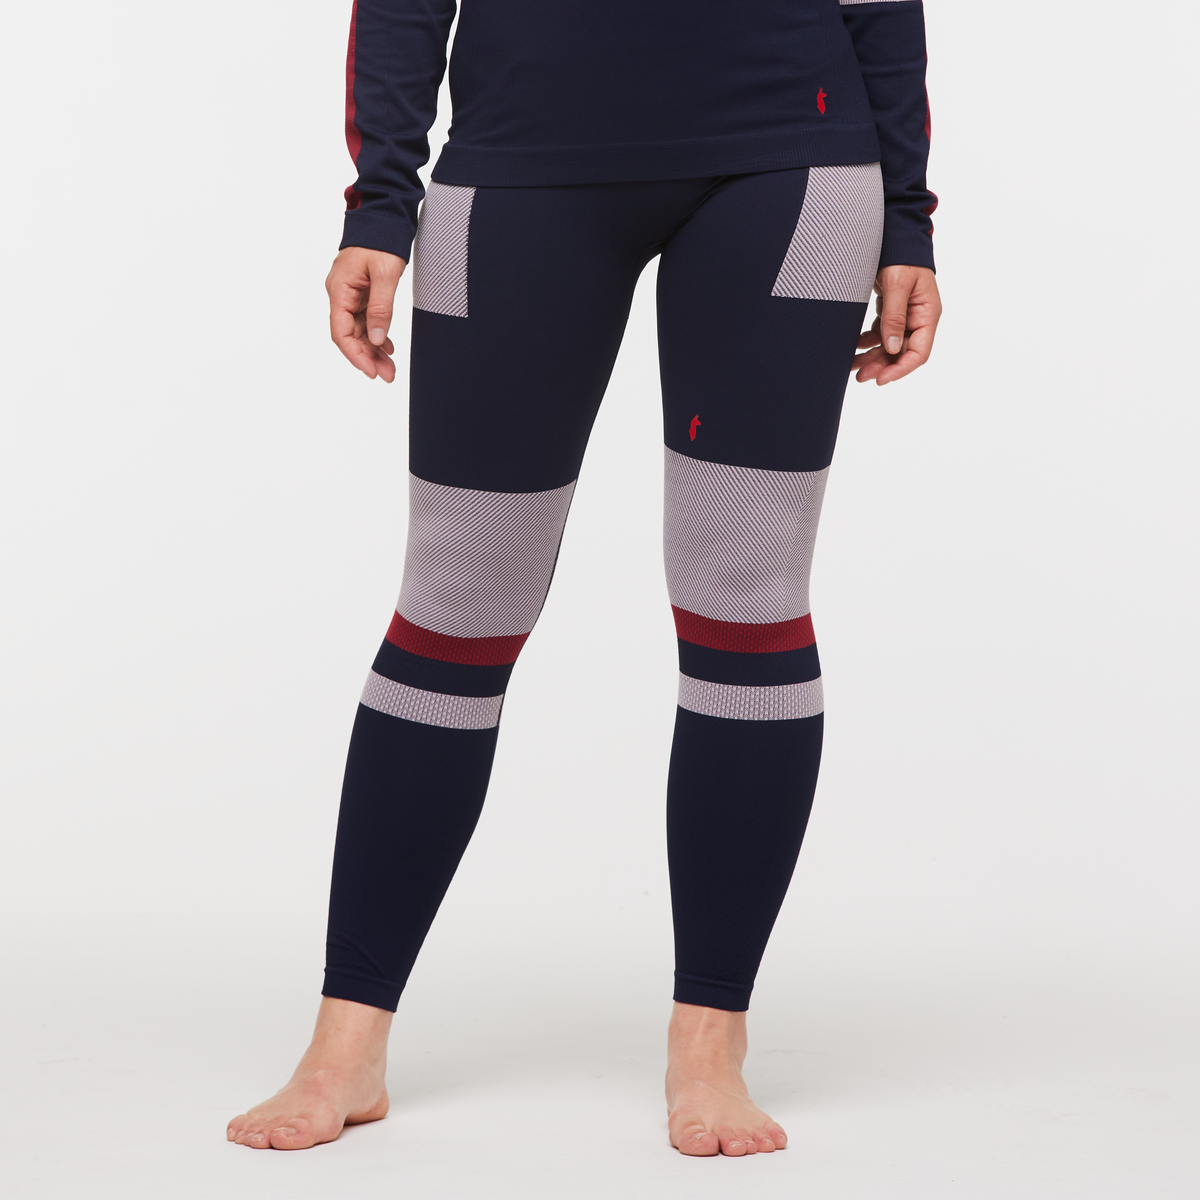 Collant thermique Superdry Seamless Baselayer Femmes